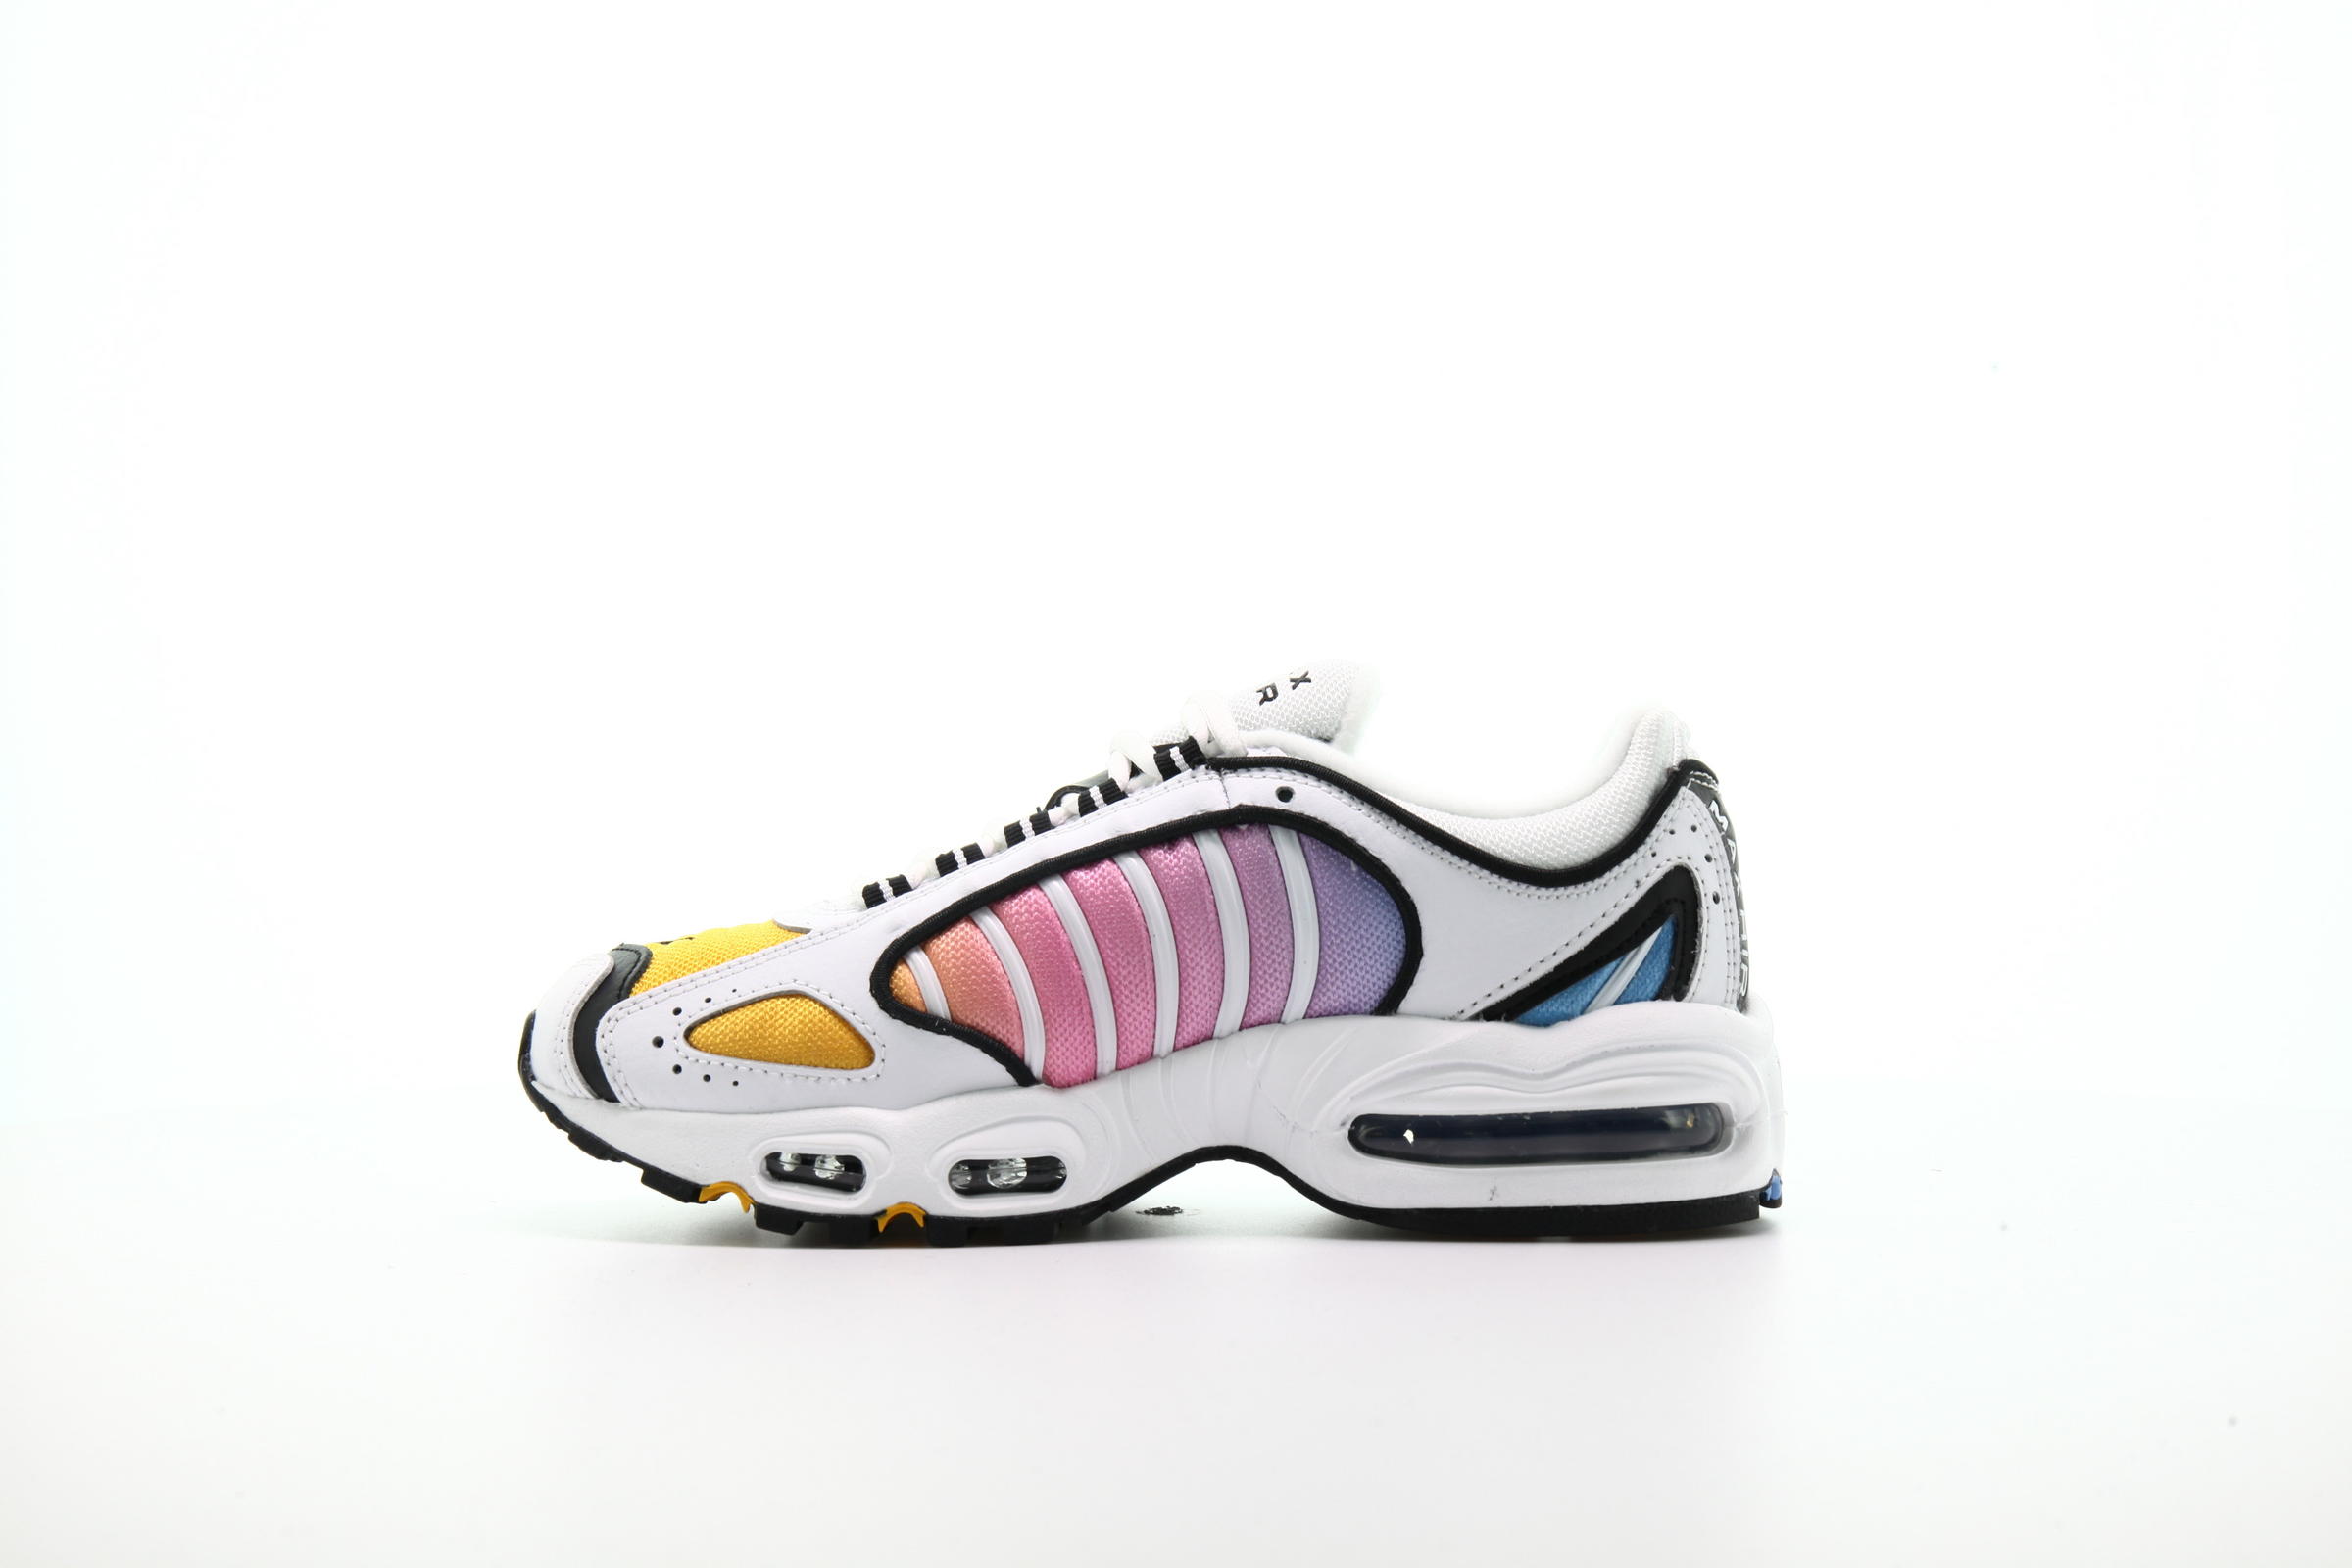 Nike WMNS Air Max Tailwind IV "Multicolor"